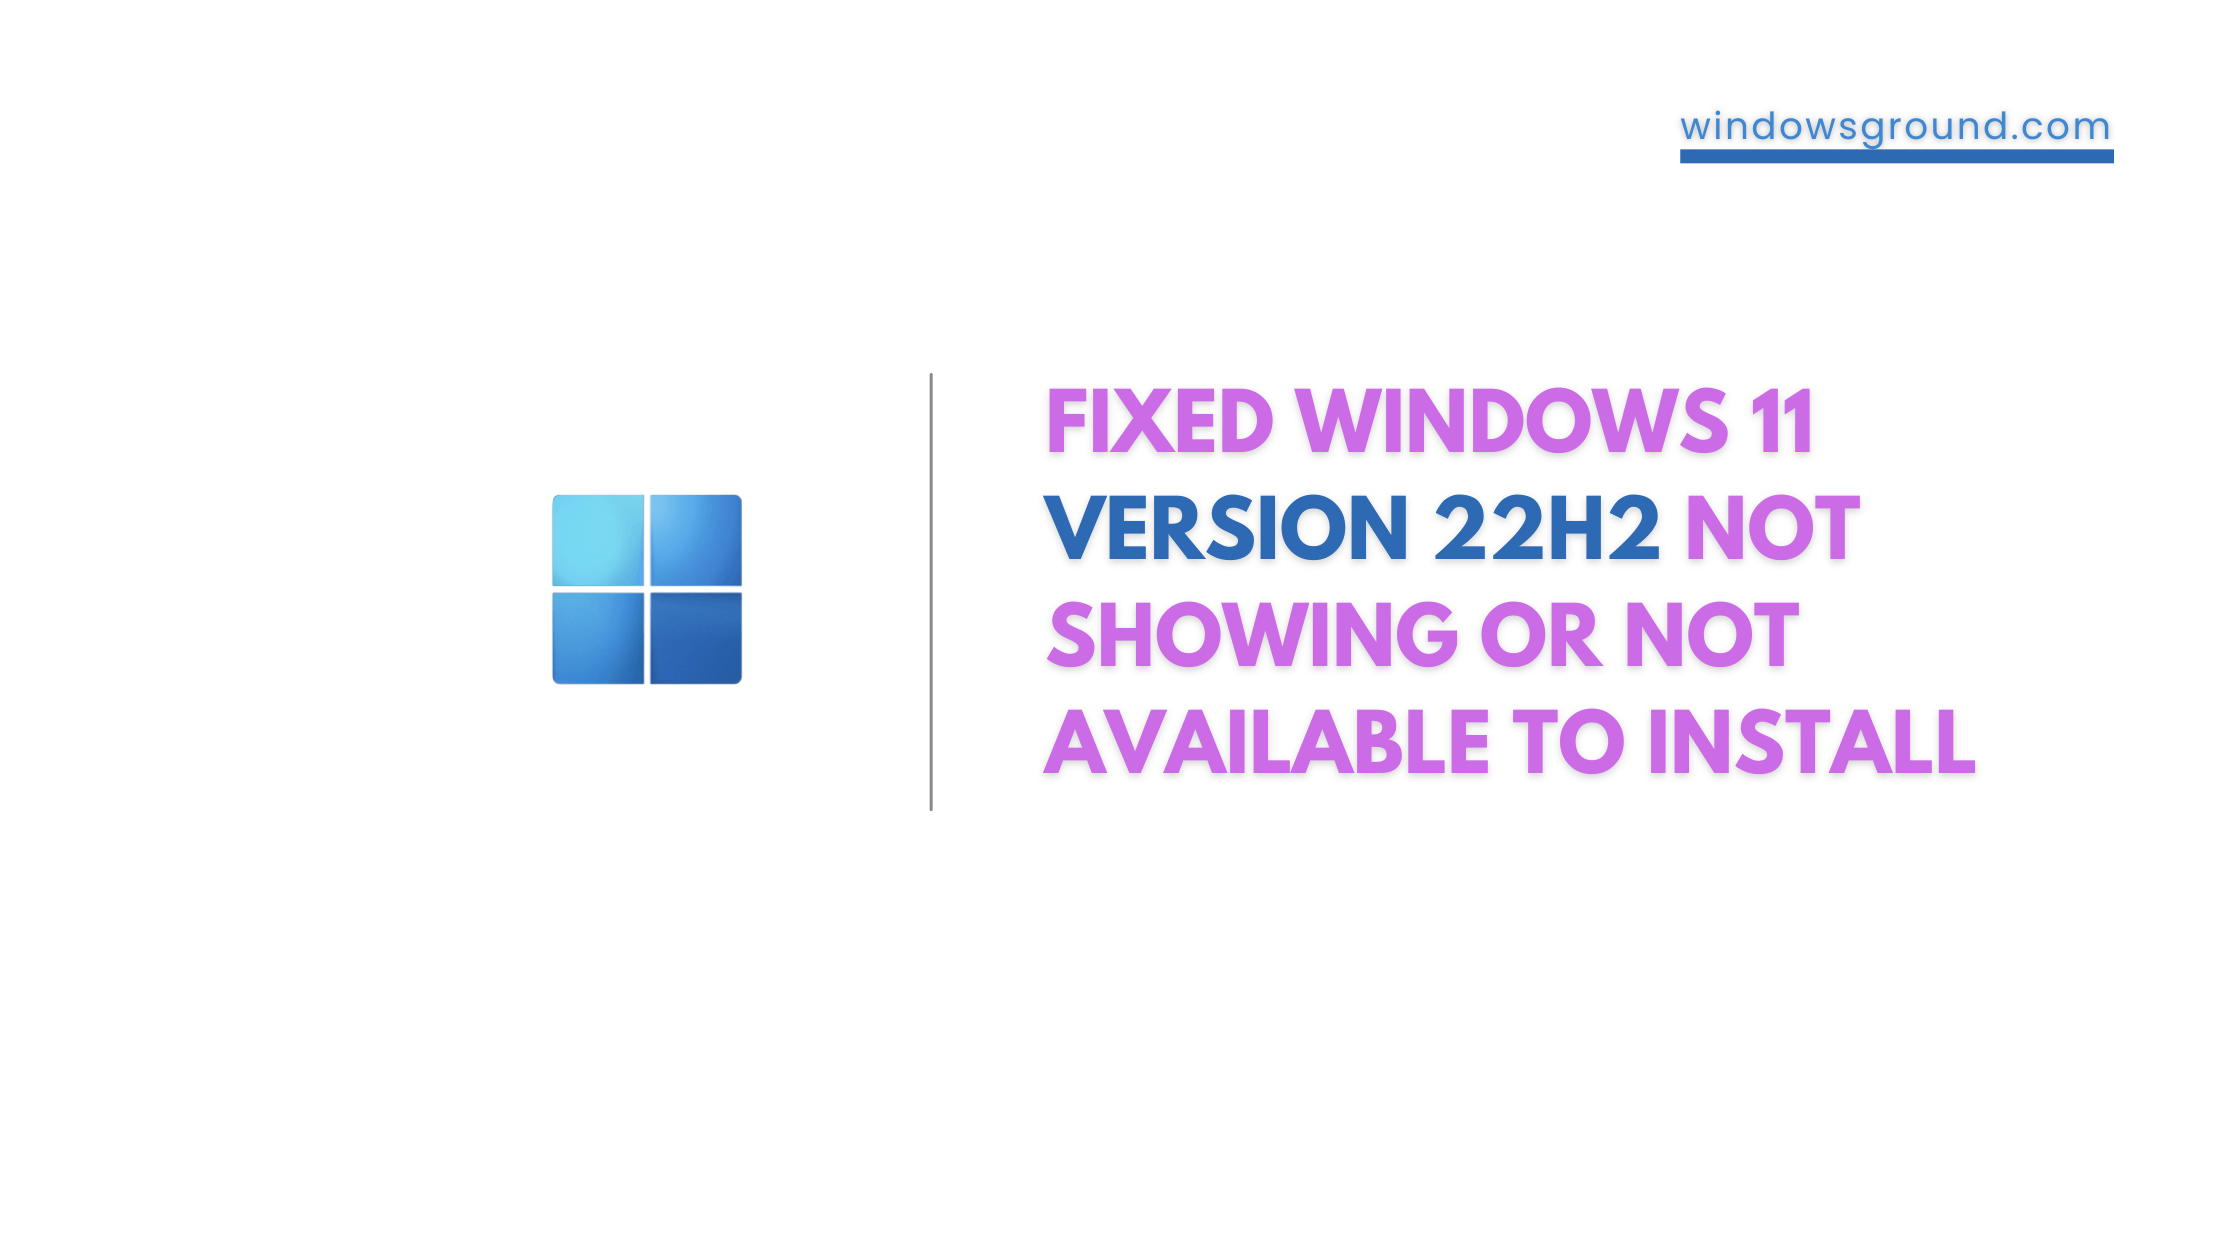 [Fixed] Windows 11 Version 22H2 Not Showing or Not Available to Install in Windows Update